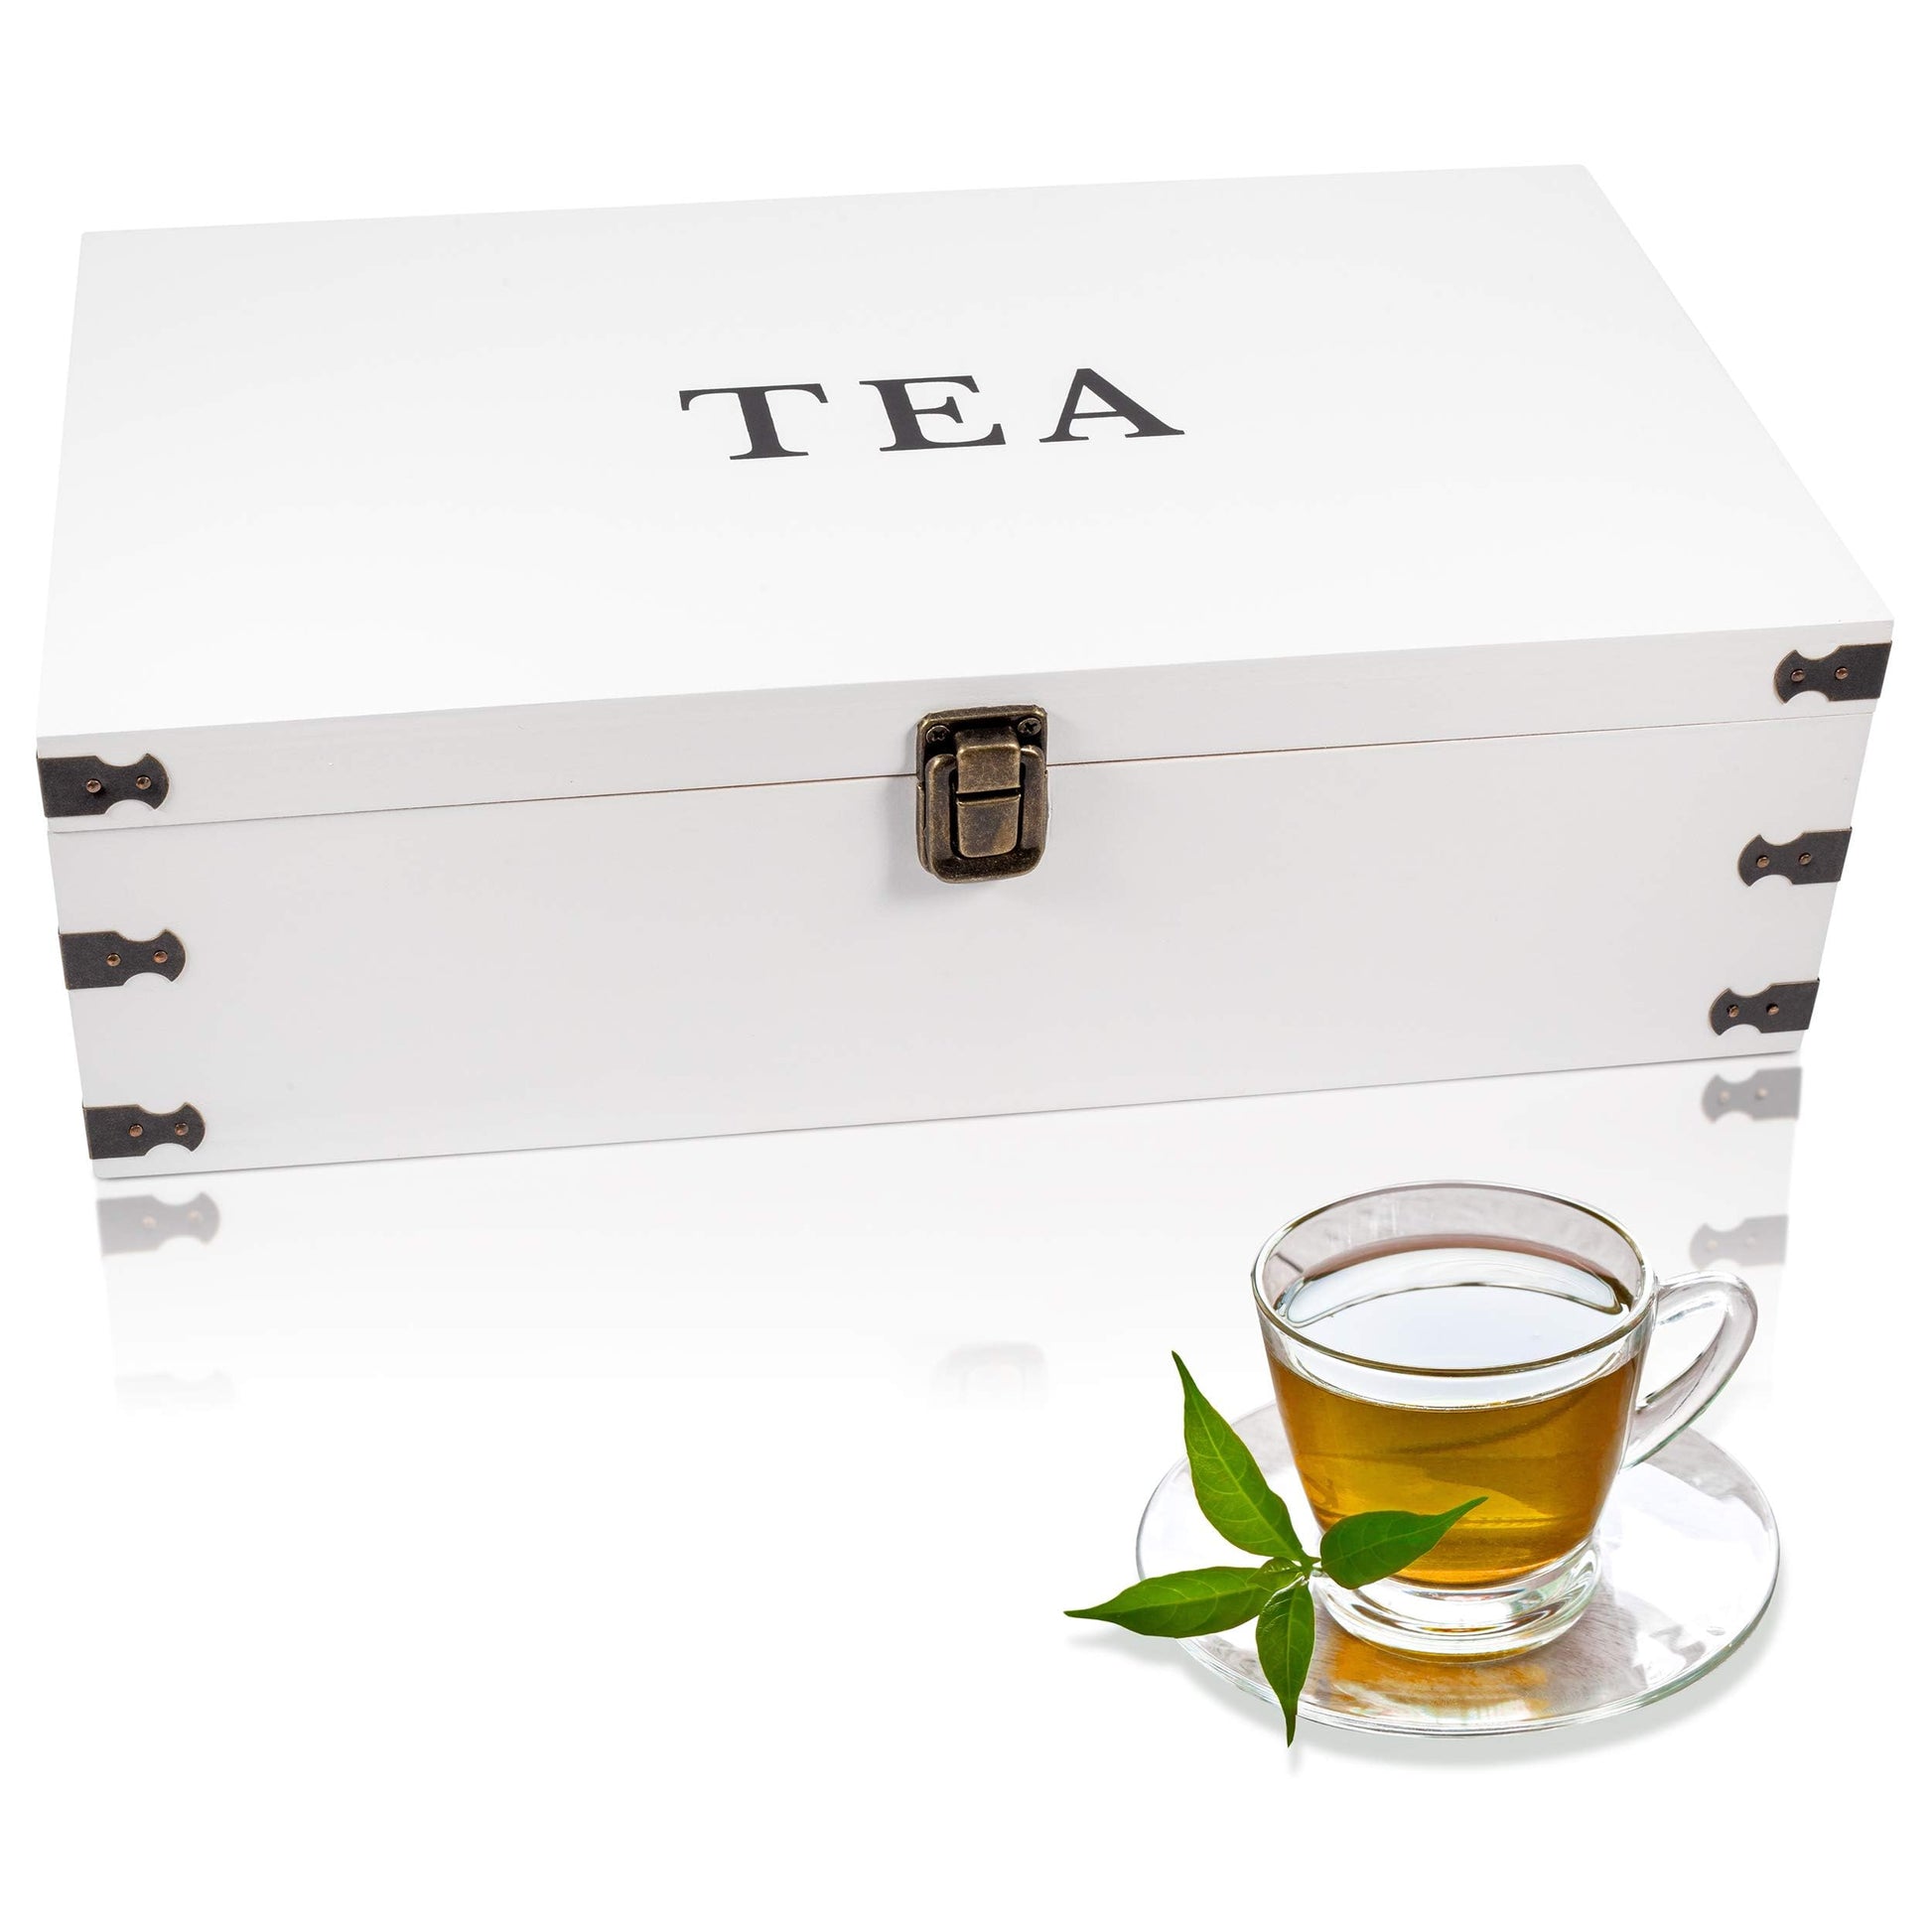 Large Wooden Tea Organizer Box Big 14 Bamboo Storage Chest 8-Compartm –  Zen Earth Inspired